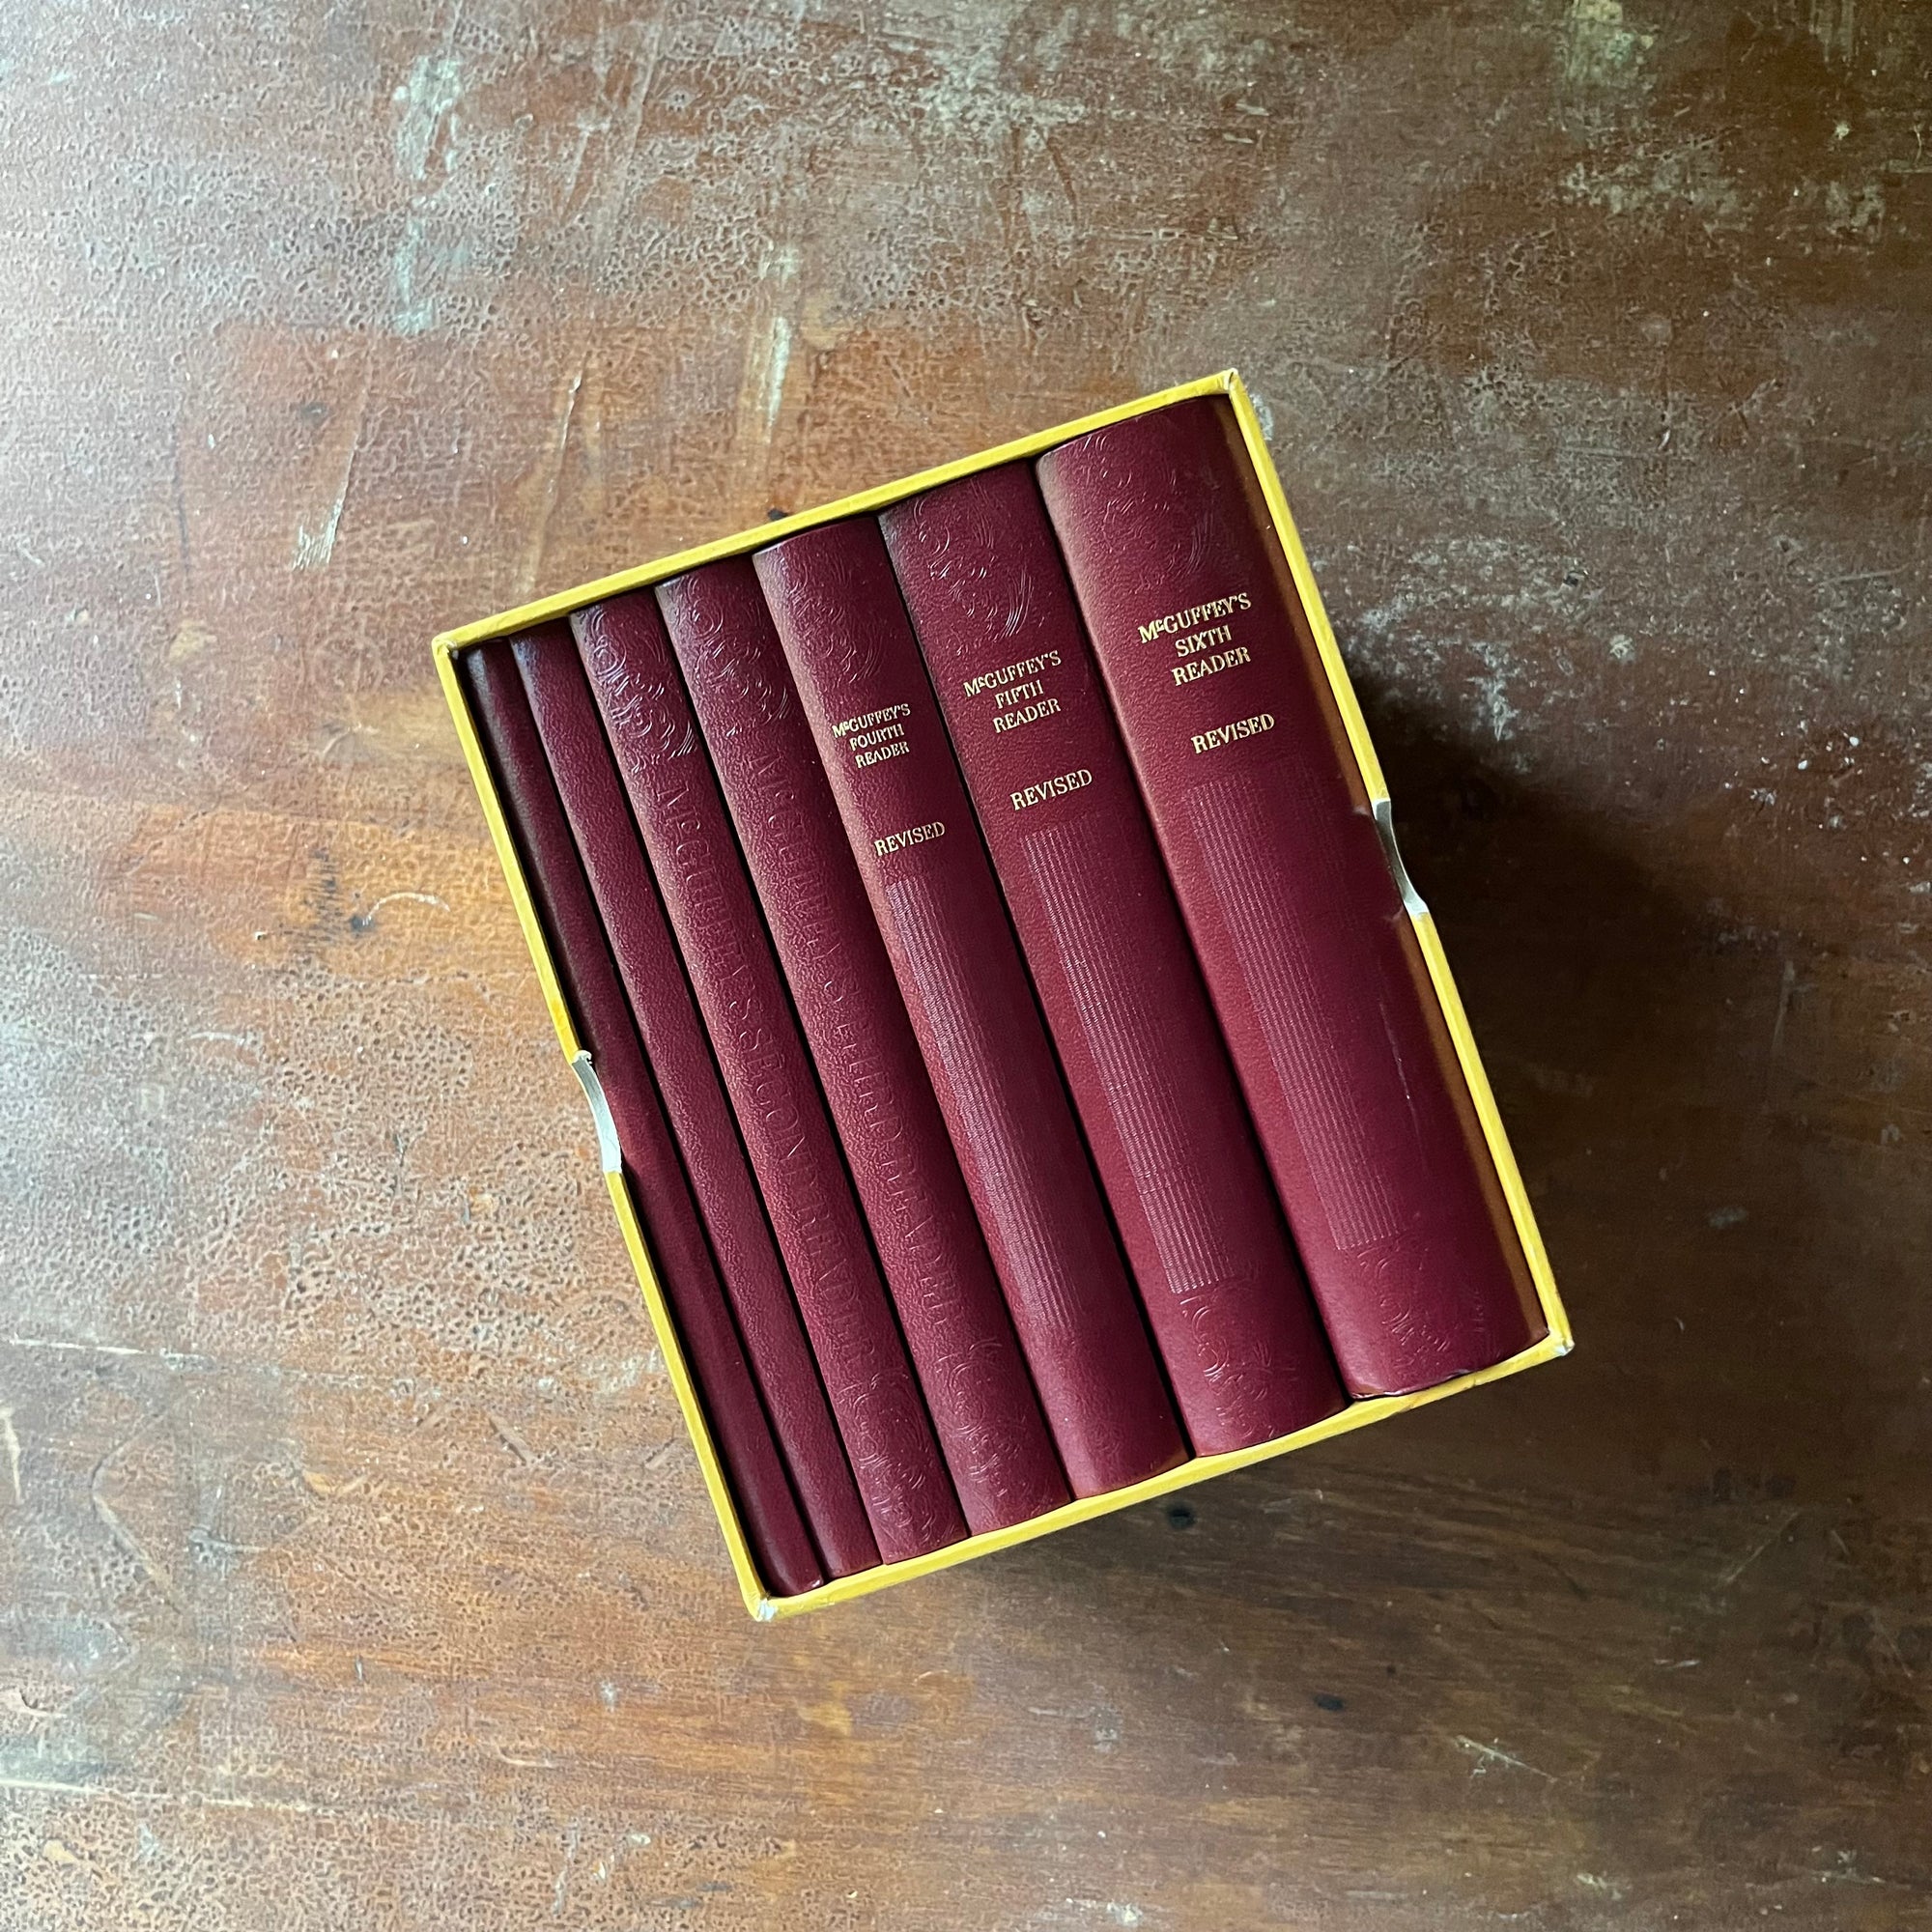 vintage children's books, children's school primers - McGuffey's Eclectic Readers Primer Through the Sixth written by William Holmes McGuffey - Complete Book Set in Cardboard Sleeve - view of the spines - some of which are embossed - rich, maroon color